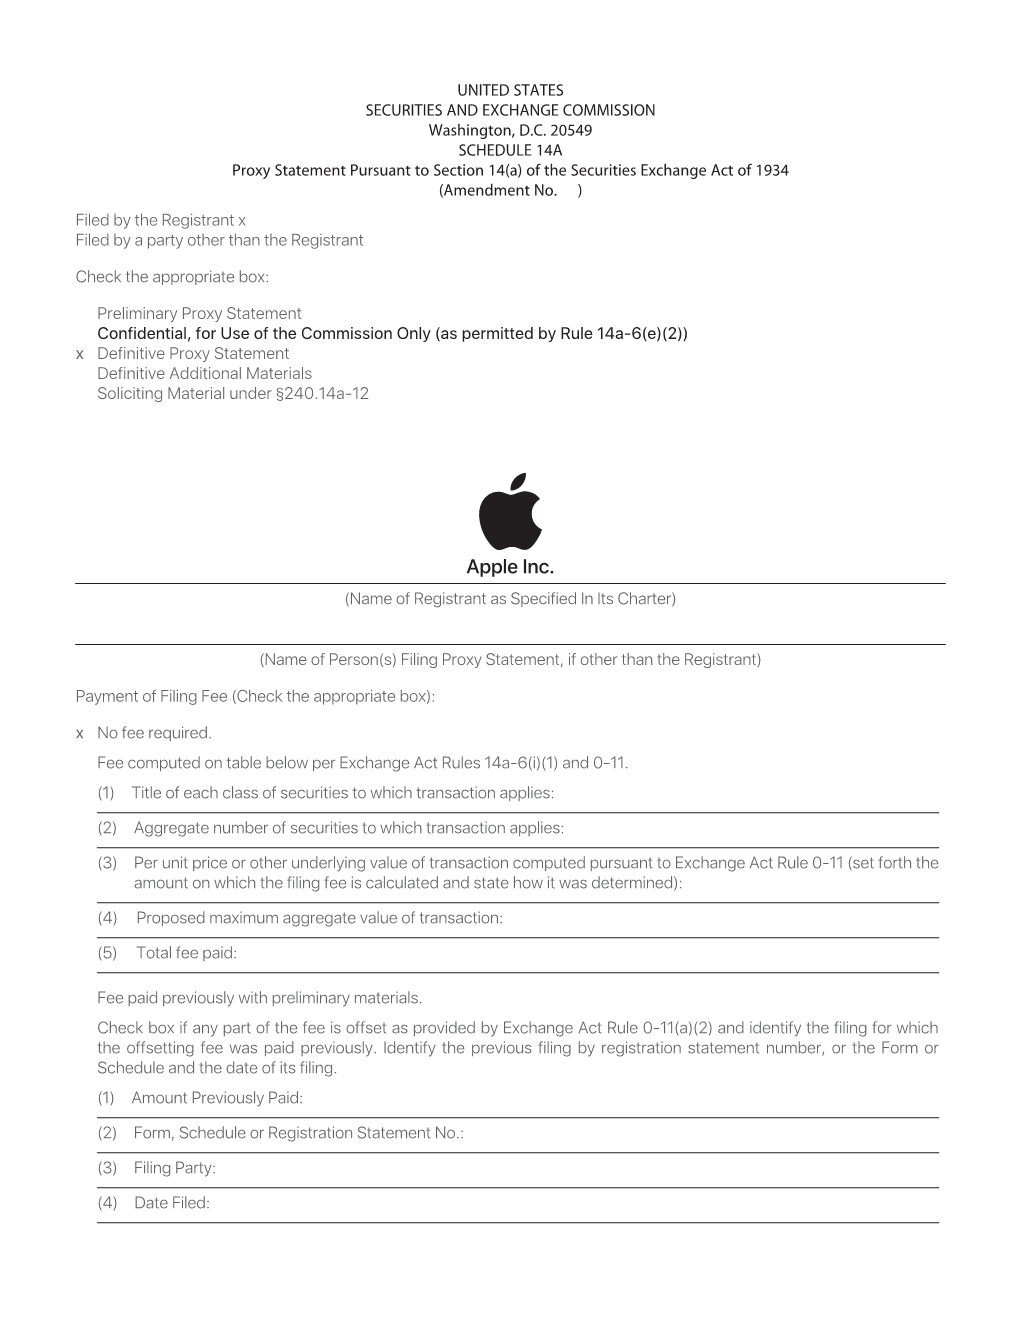 Apple Inc. (Name of Registrant As Specified in Its Charter)